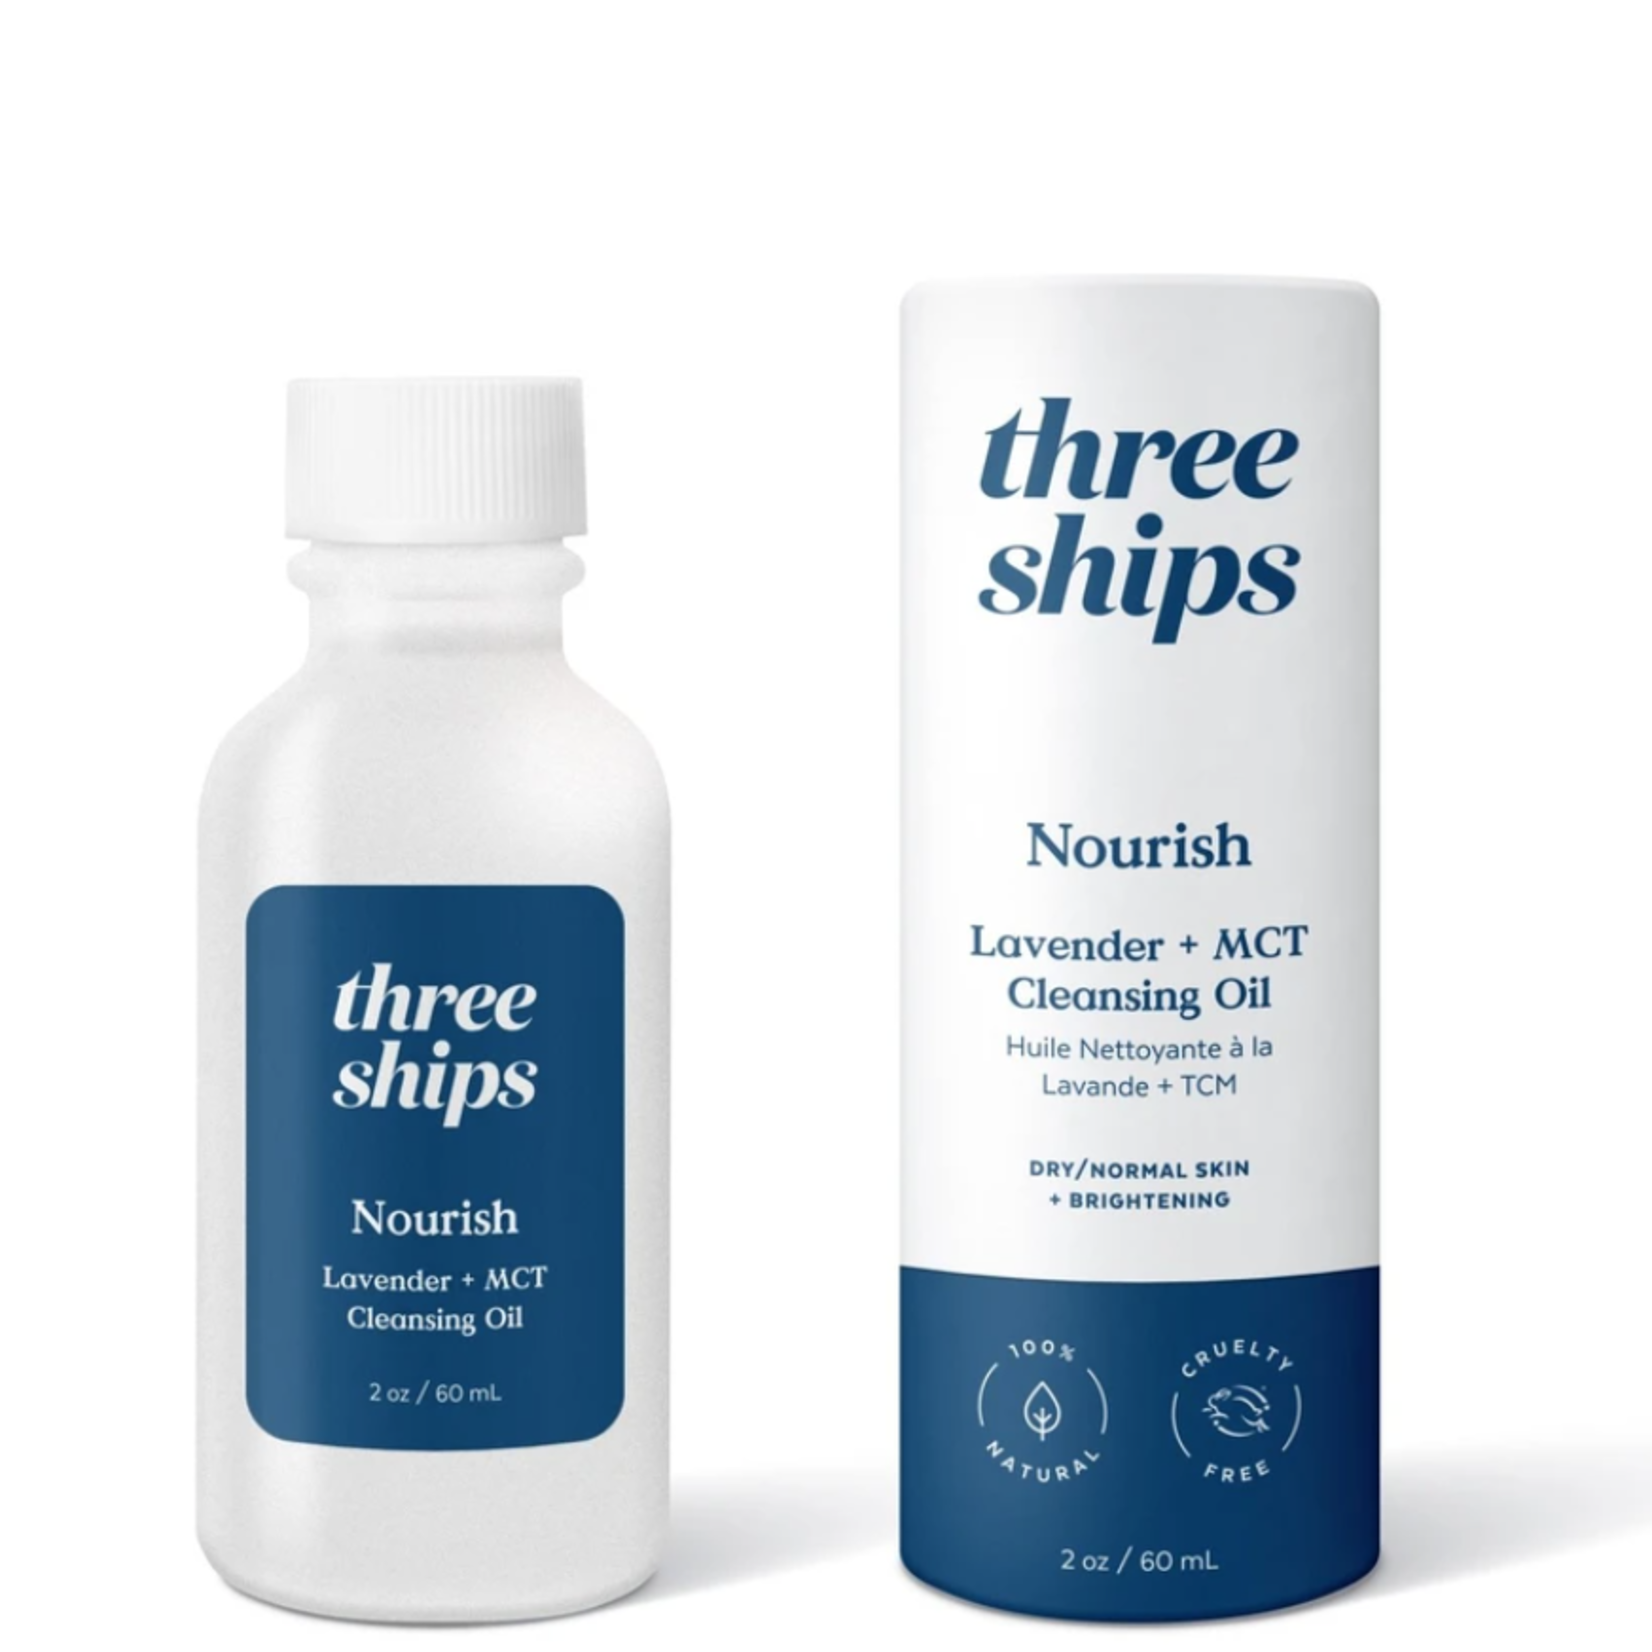 Three ships LAVENDER + MCT CLEANSING OIL